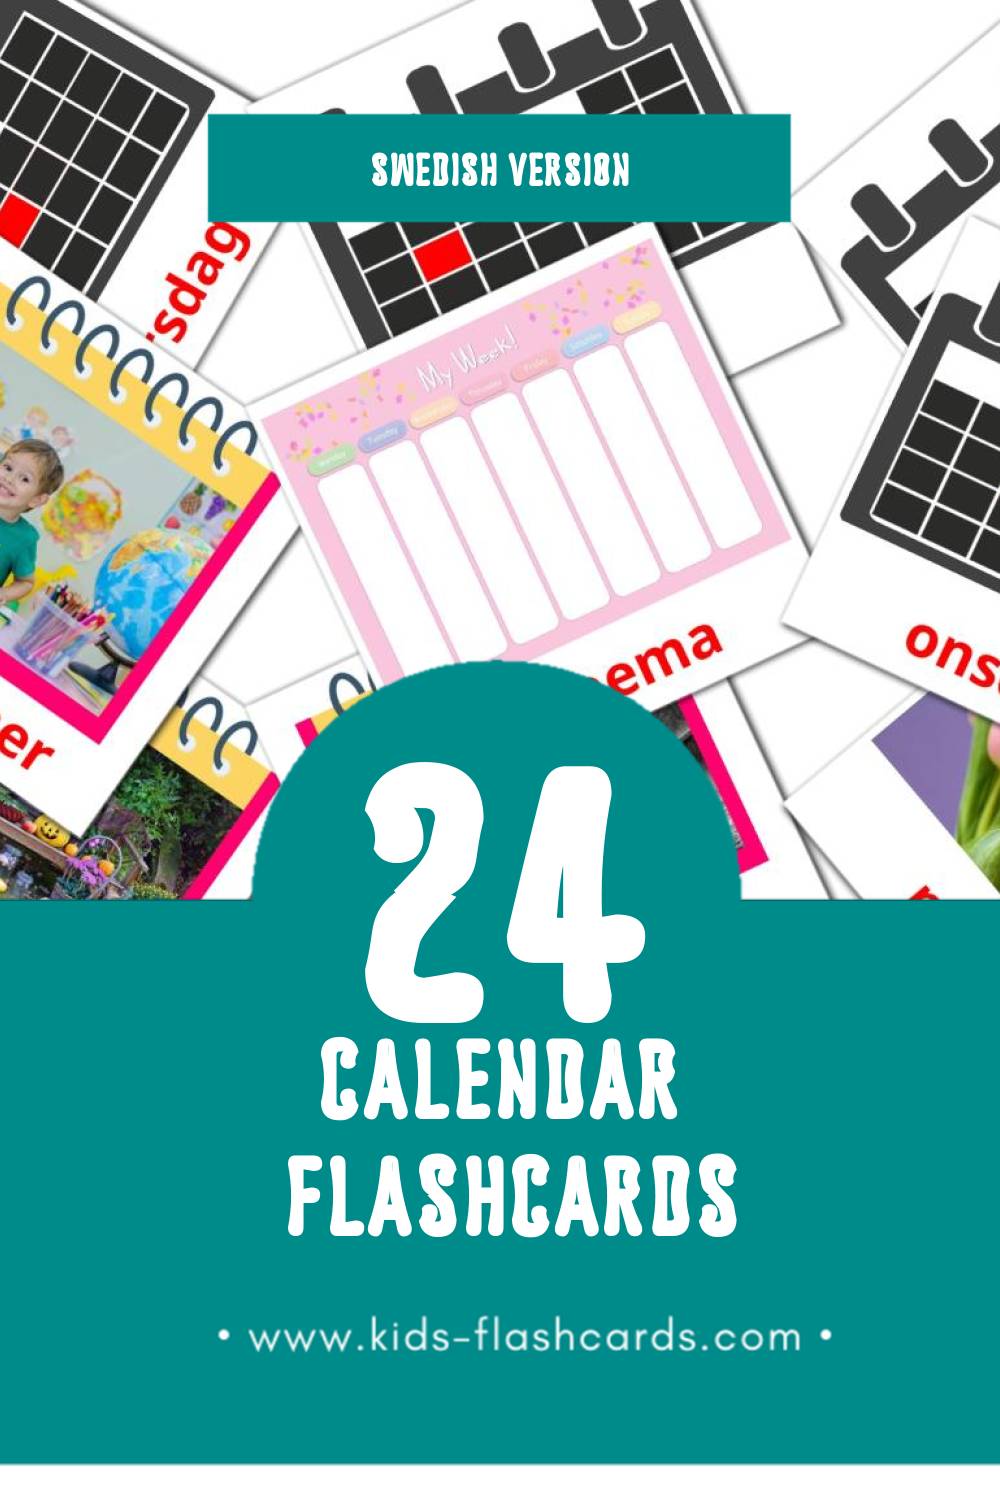 Visual Kalender Flashcards for Toddlers (24 cards in Swedish)